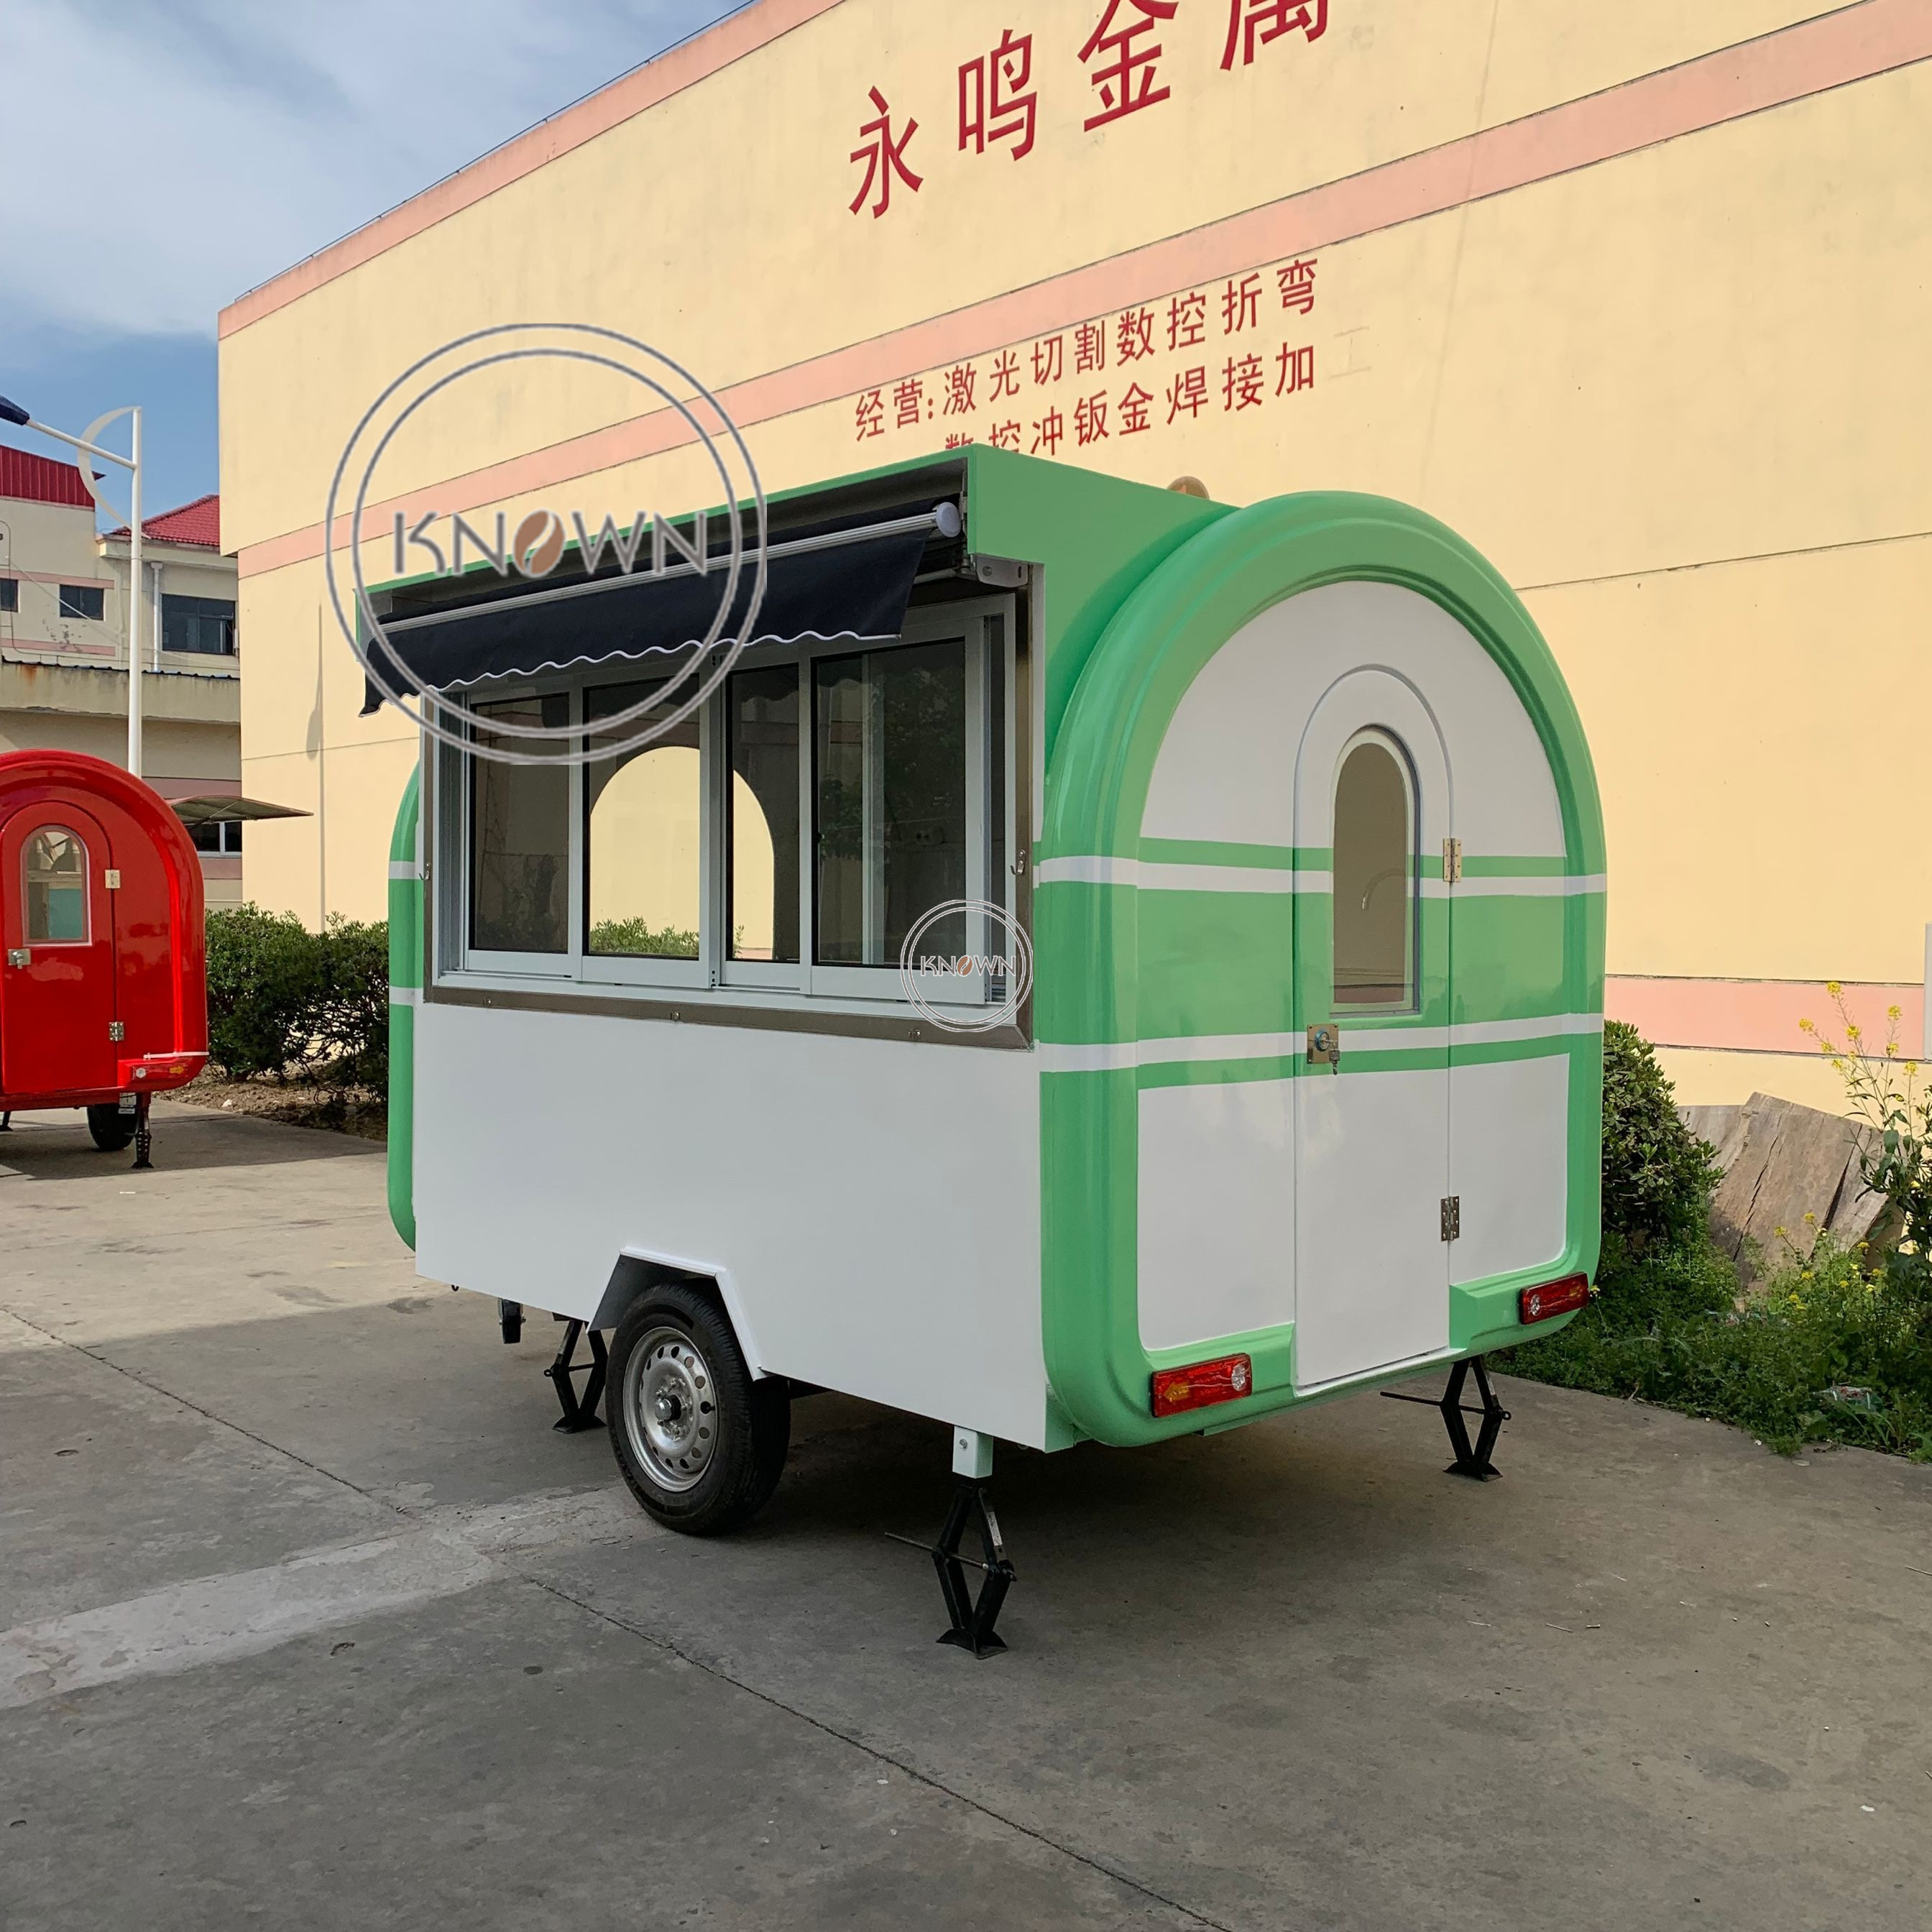 2.8M Catering Trailer Food Truck Mobile Kitchen Street Food Cart for Sale